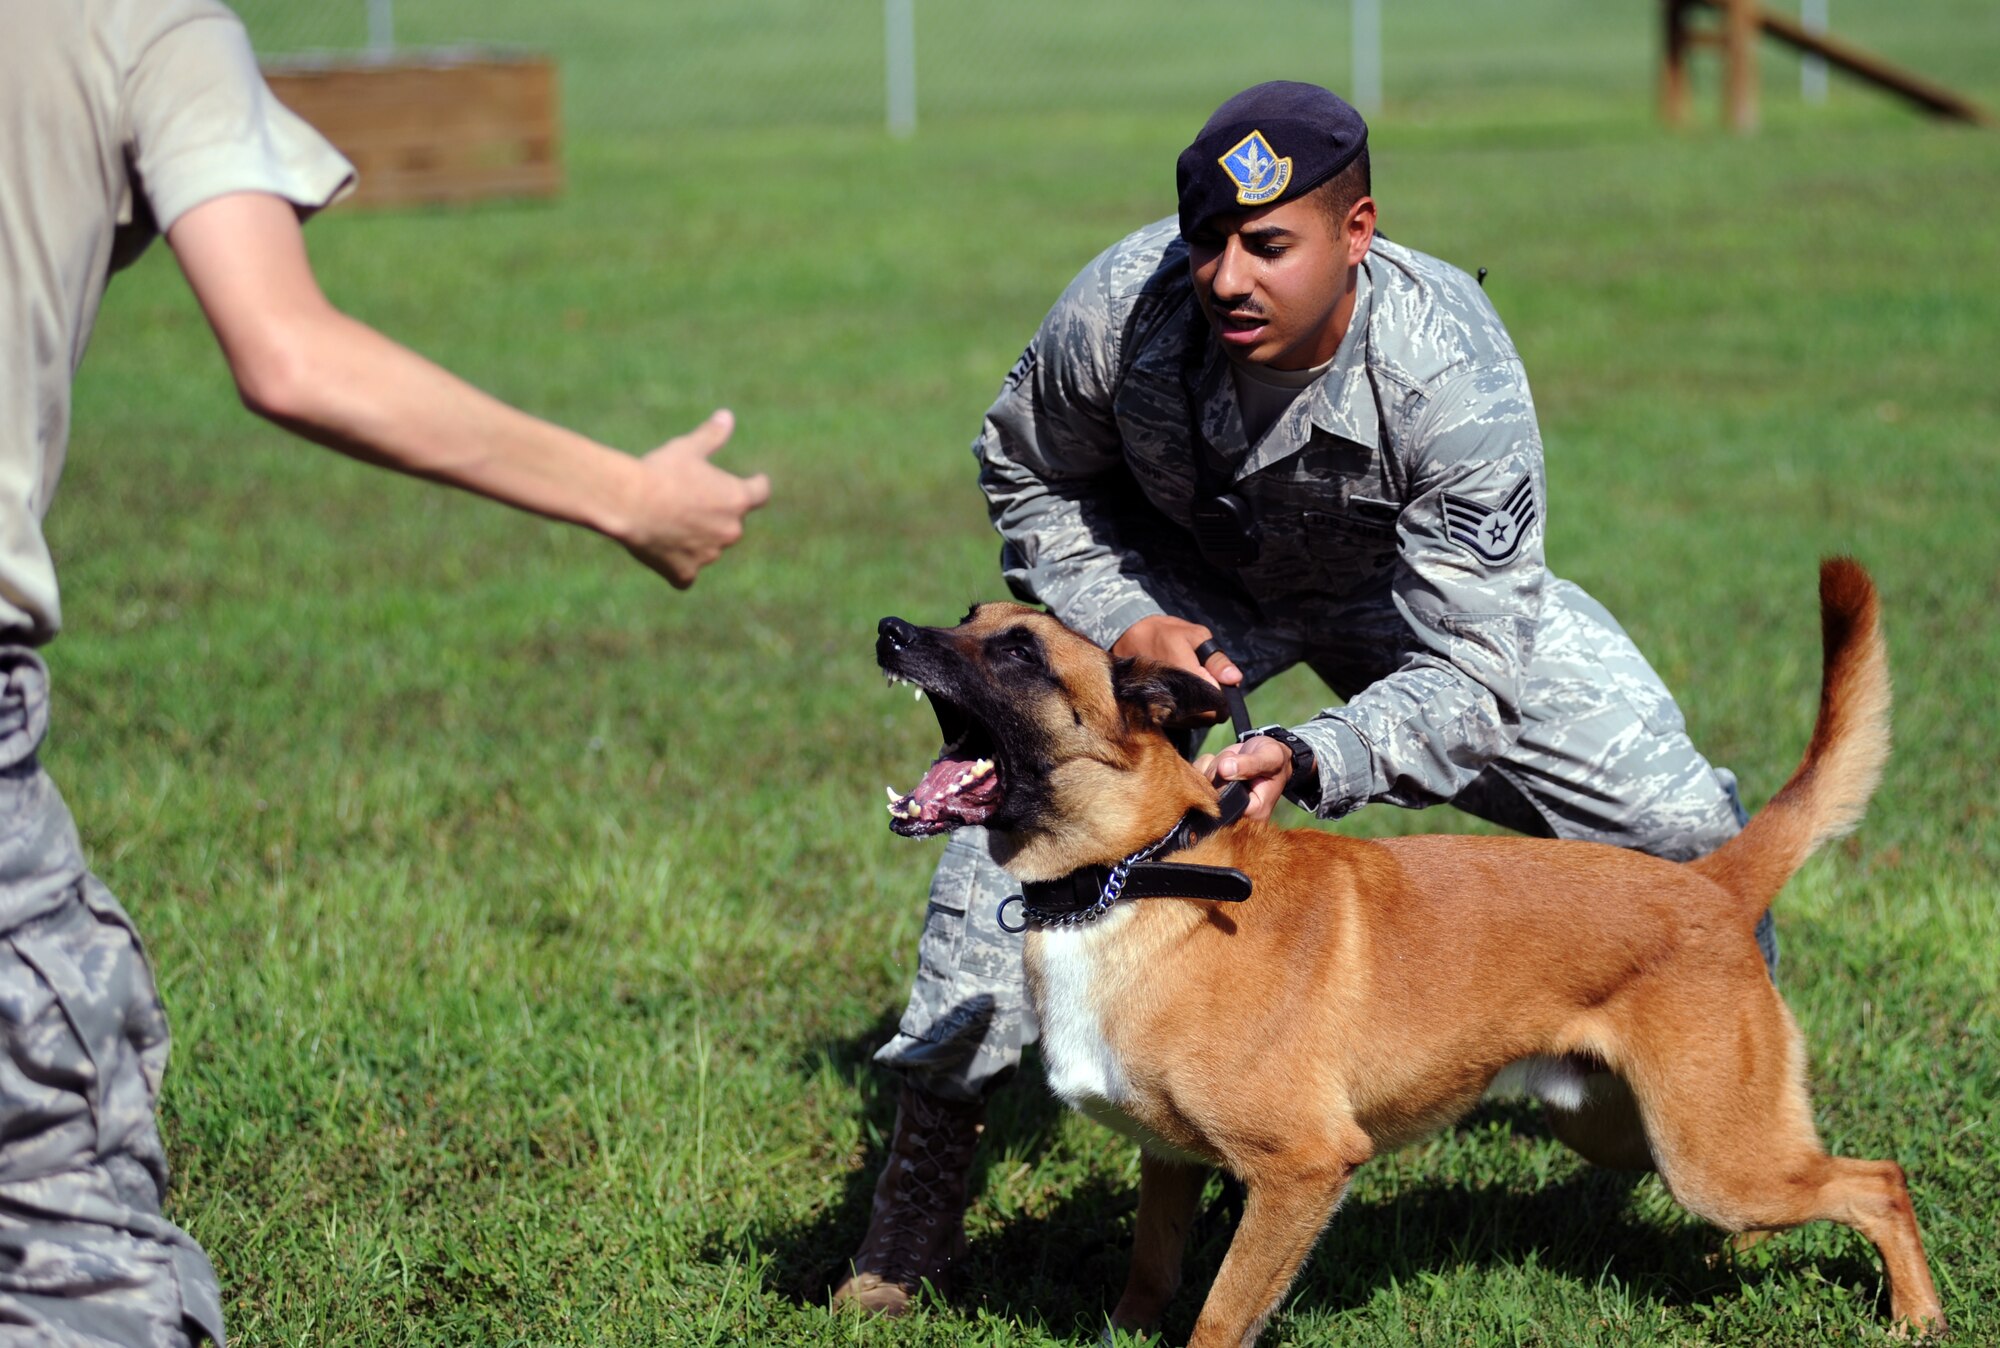 Military working dog Arton shows aggression while protecting his handler Aug. 20, 2010, on Joint Base Charleston, S.C. MWDs are trained to protect their handlers from aggressive individuals with or with out a command. U.S. Air Force Staff Sgt. Fazel Munshi and his dog Arton have been training together and building a rapport for approximately one year. Sergeant Munshi is a dog handler with the 628th Security Forces Squadron. (U.S. Air Force photo/Senior Airman Timothy Taylor)